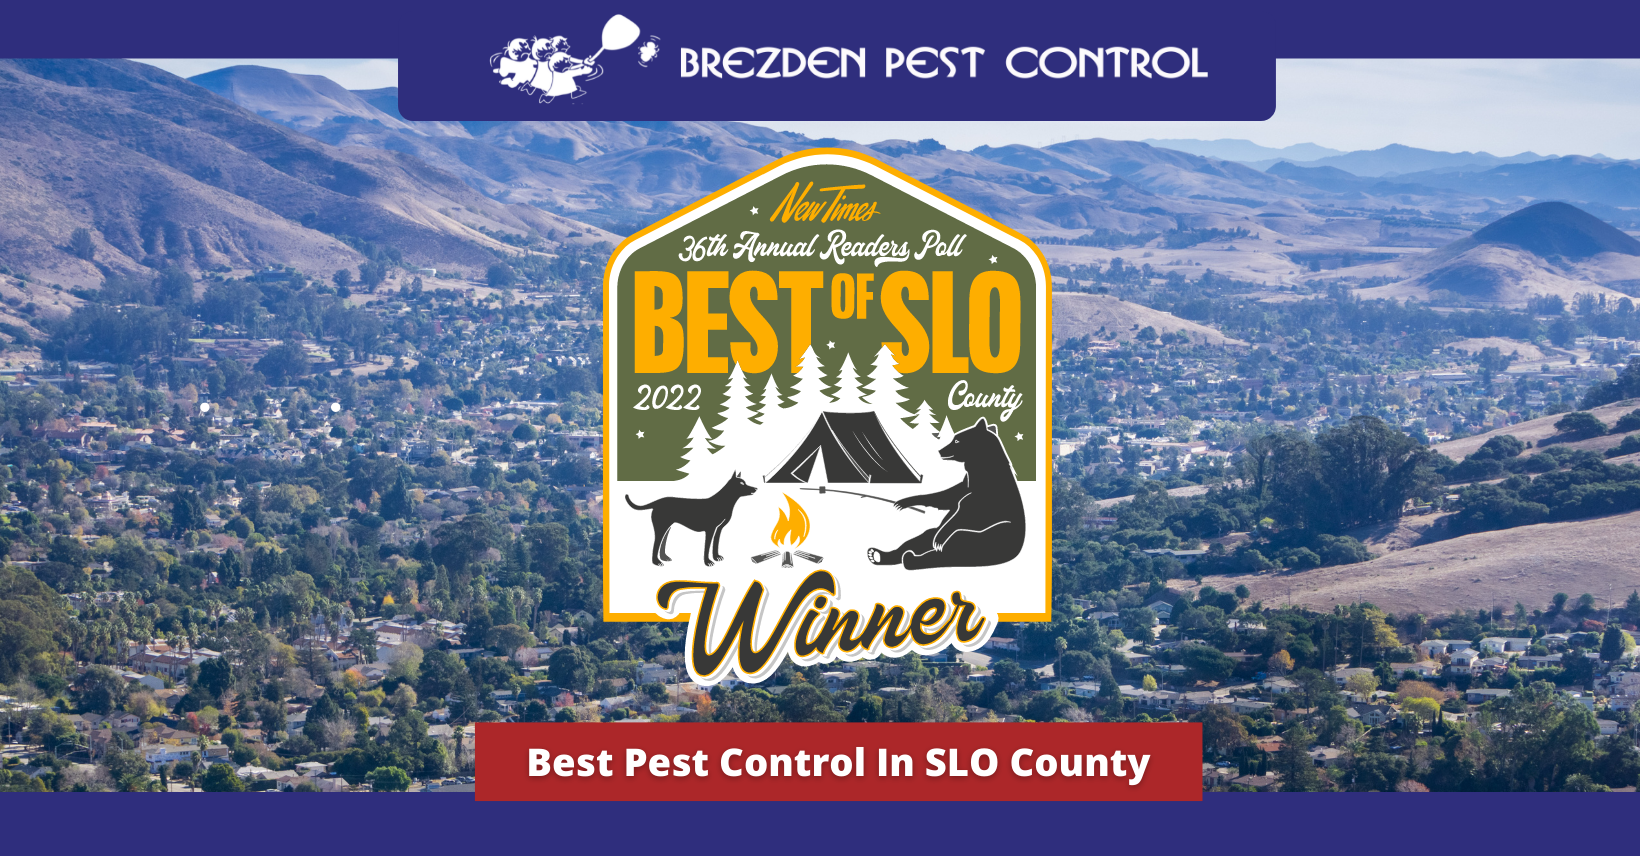 THANK YOU to the New Times reader’s poll for voting Brezden Pest Control “Best of SLO County” in 2022